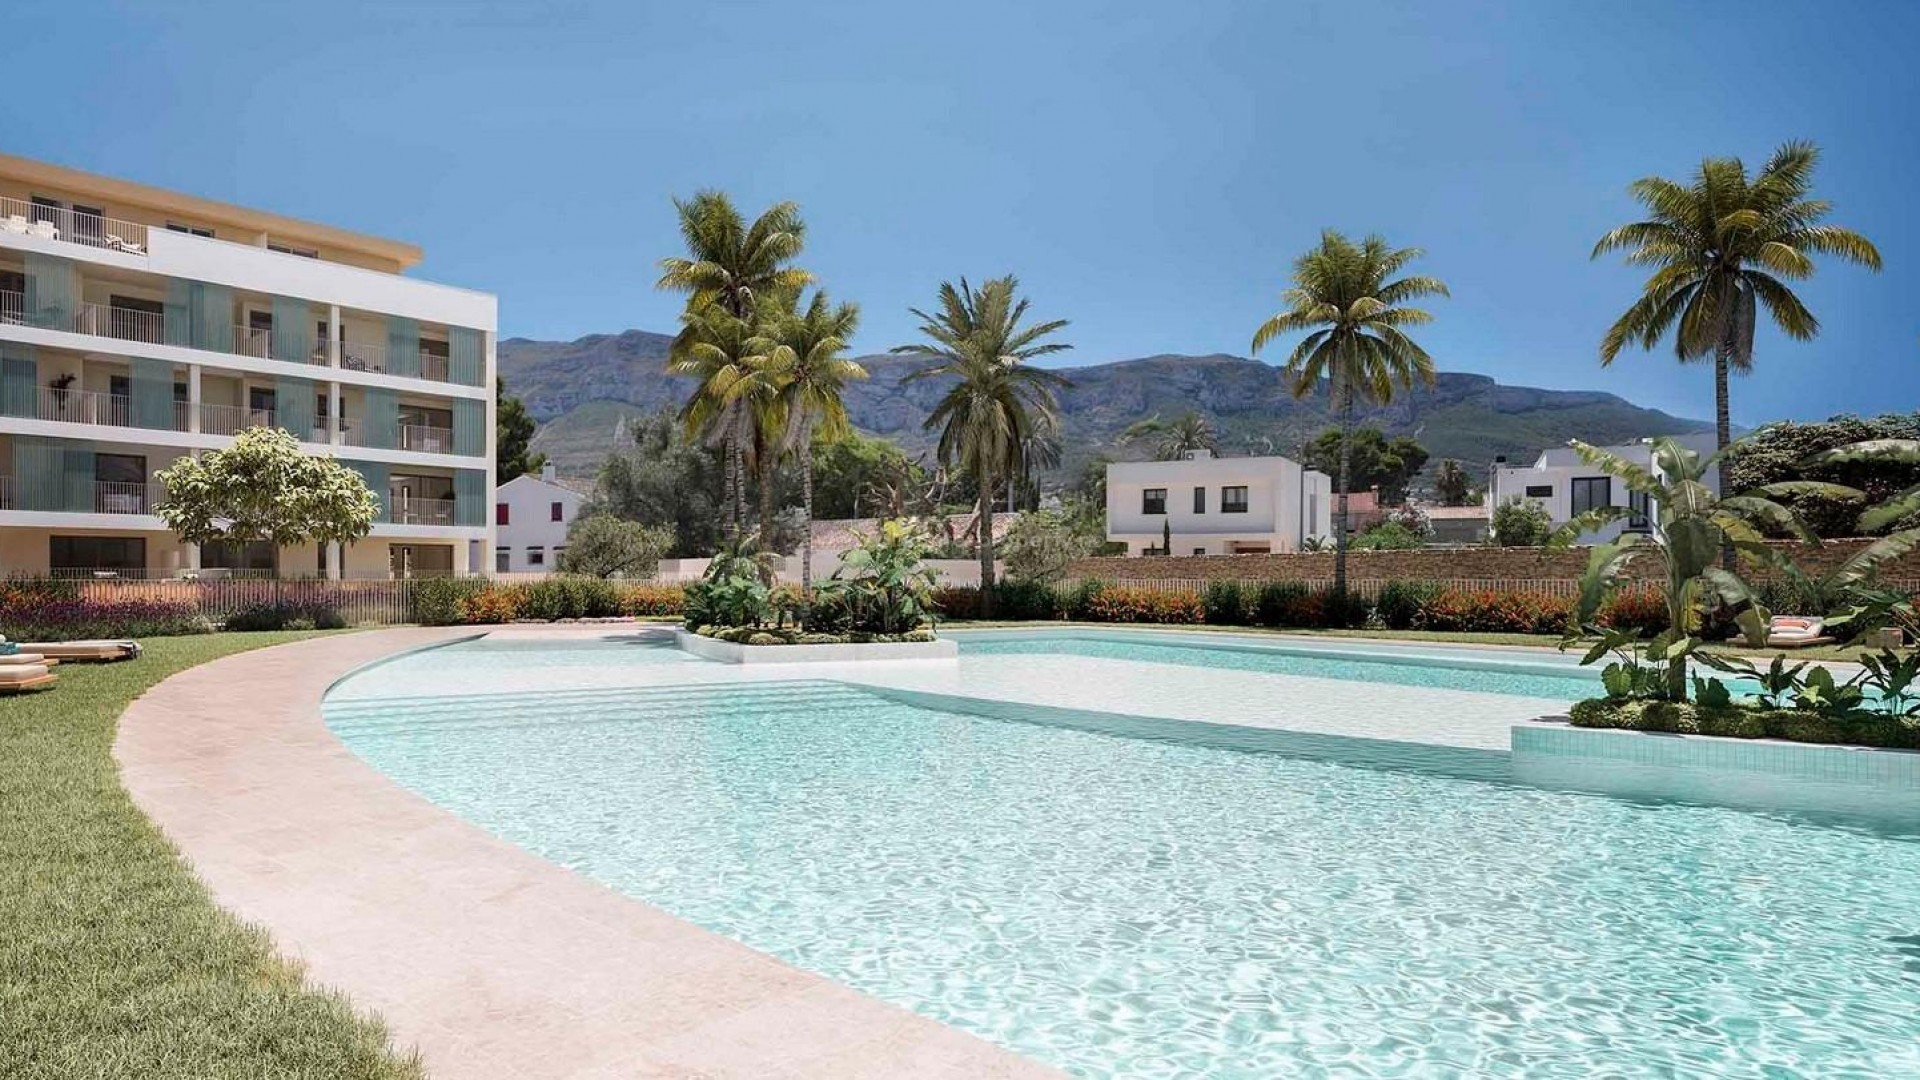 Exclusive residential complex with apartments in Denia near the sea, 2/3/4 bedrooms, 2 bathrooms, all with nice terraces, pool for adults and children, gym